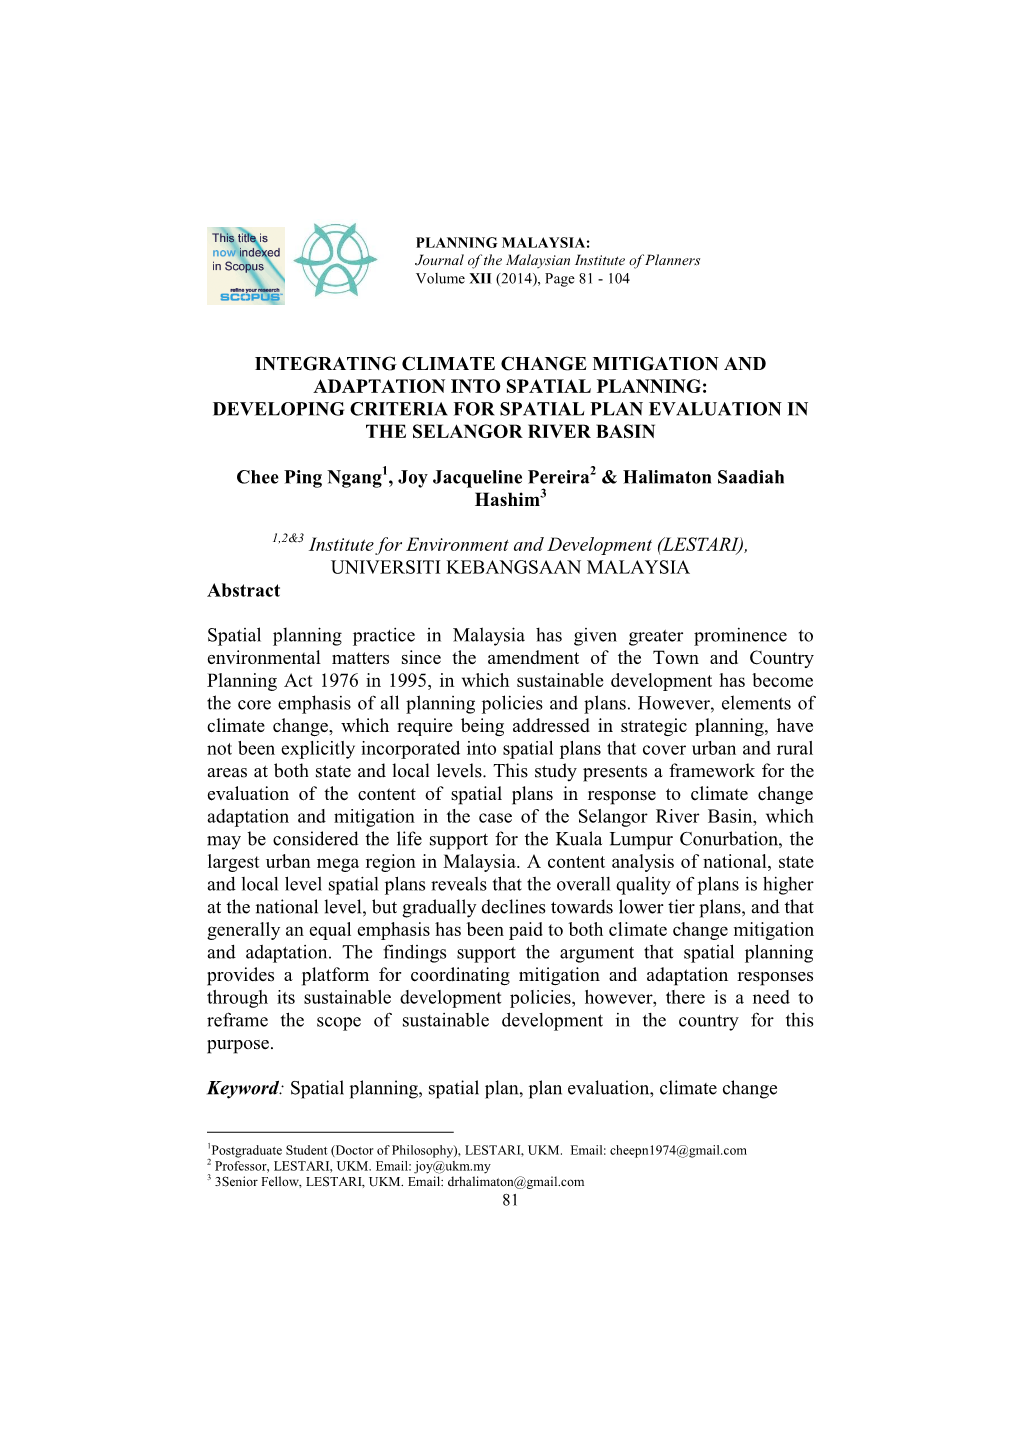 Integrating Climate Change Mitigation and Adaptation Into Spatial Planning: Developing Criteria for Spatial Plan Evaluation in the Selangor River Basin